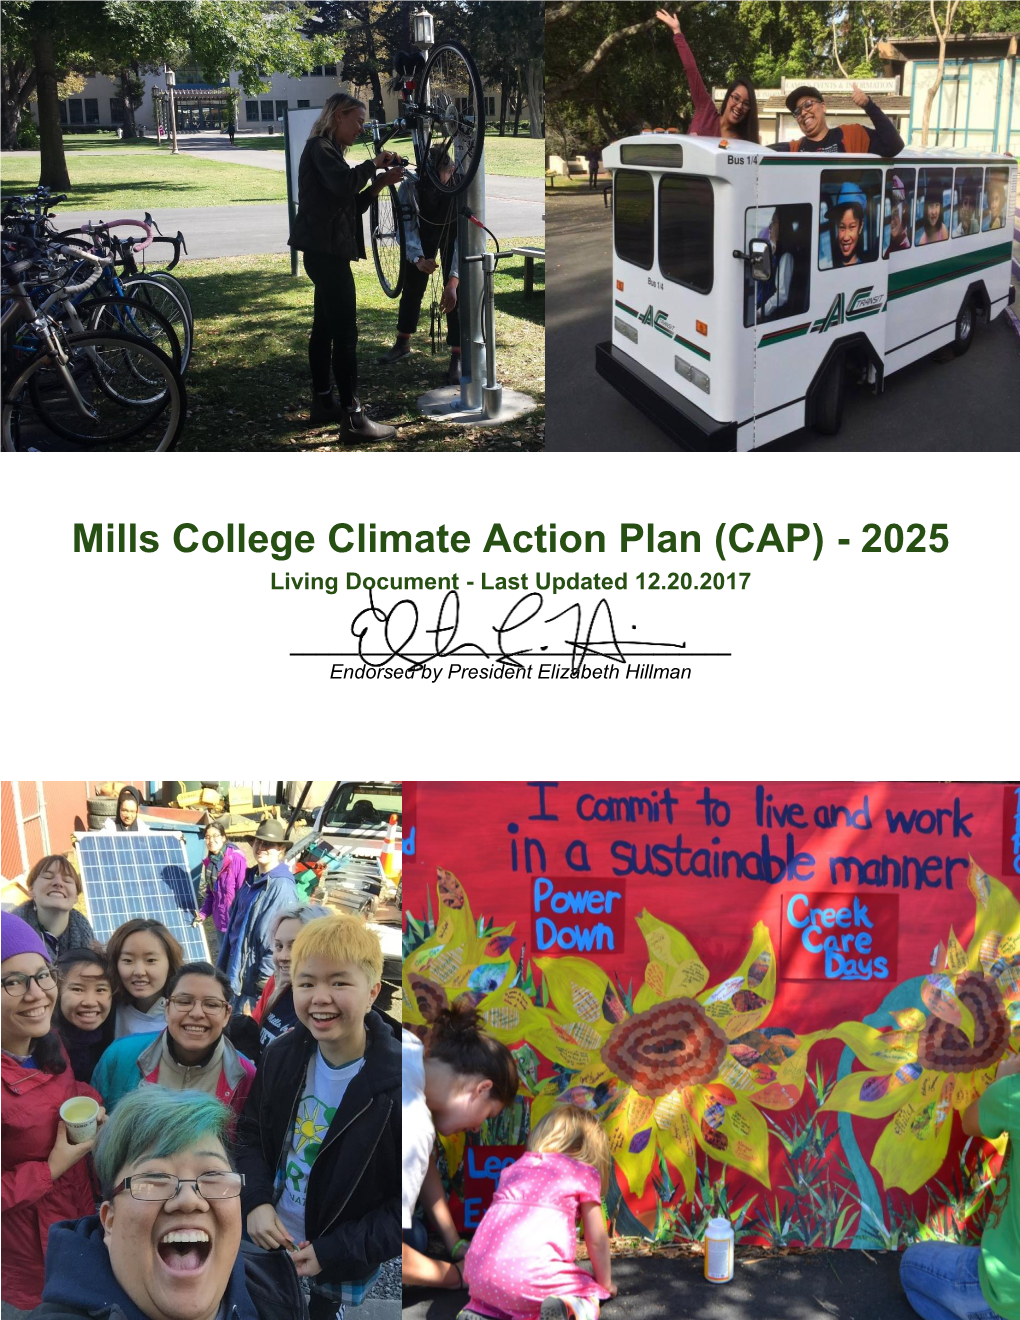 Mills College Climate Action Plan (CAP) - 2025 Living Document - Last Updated 12.20.2017